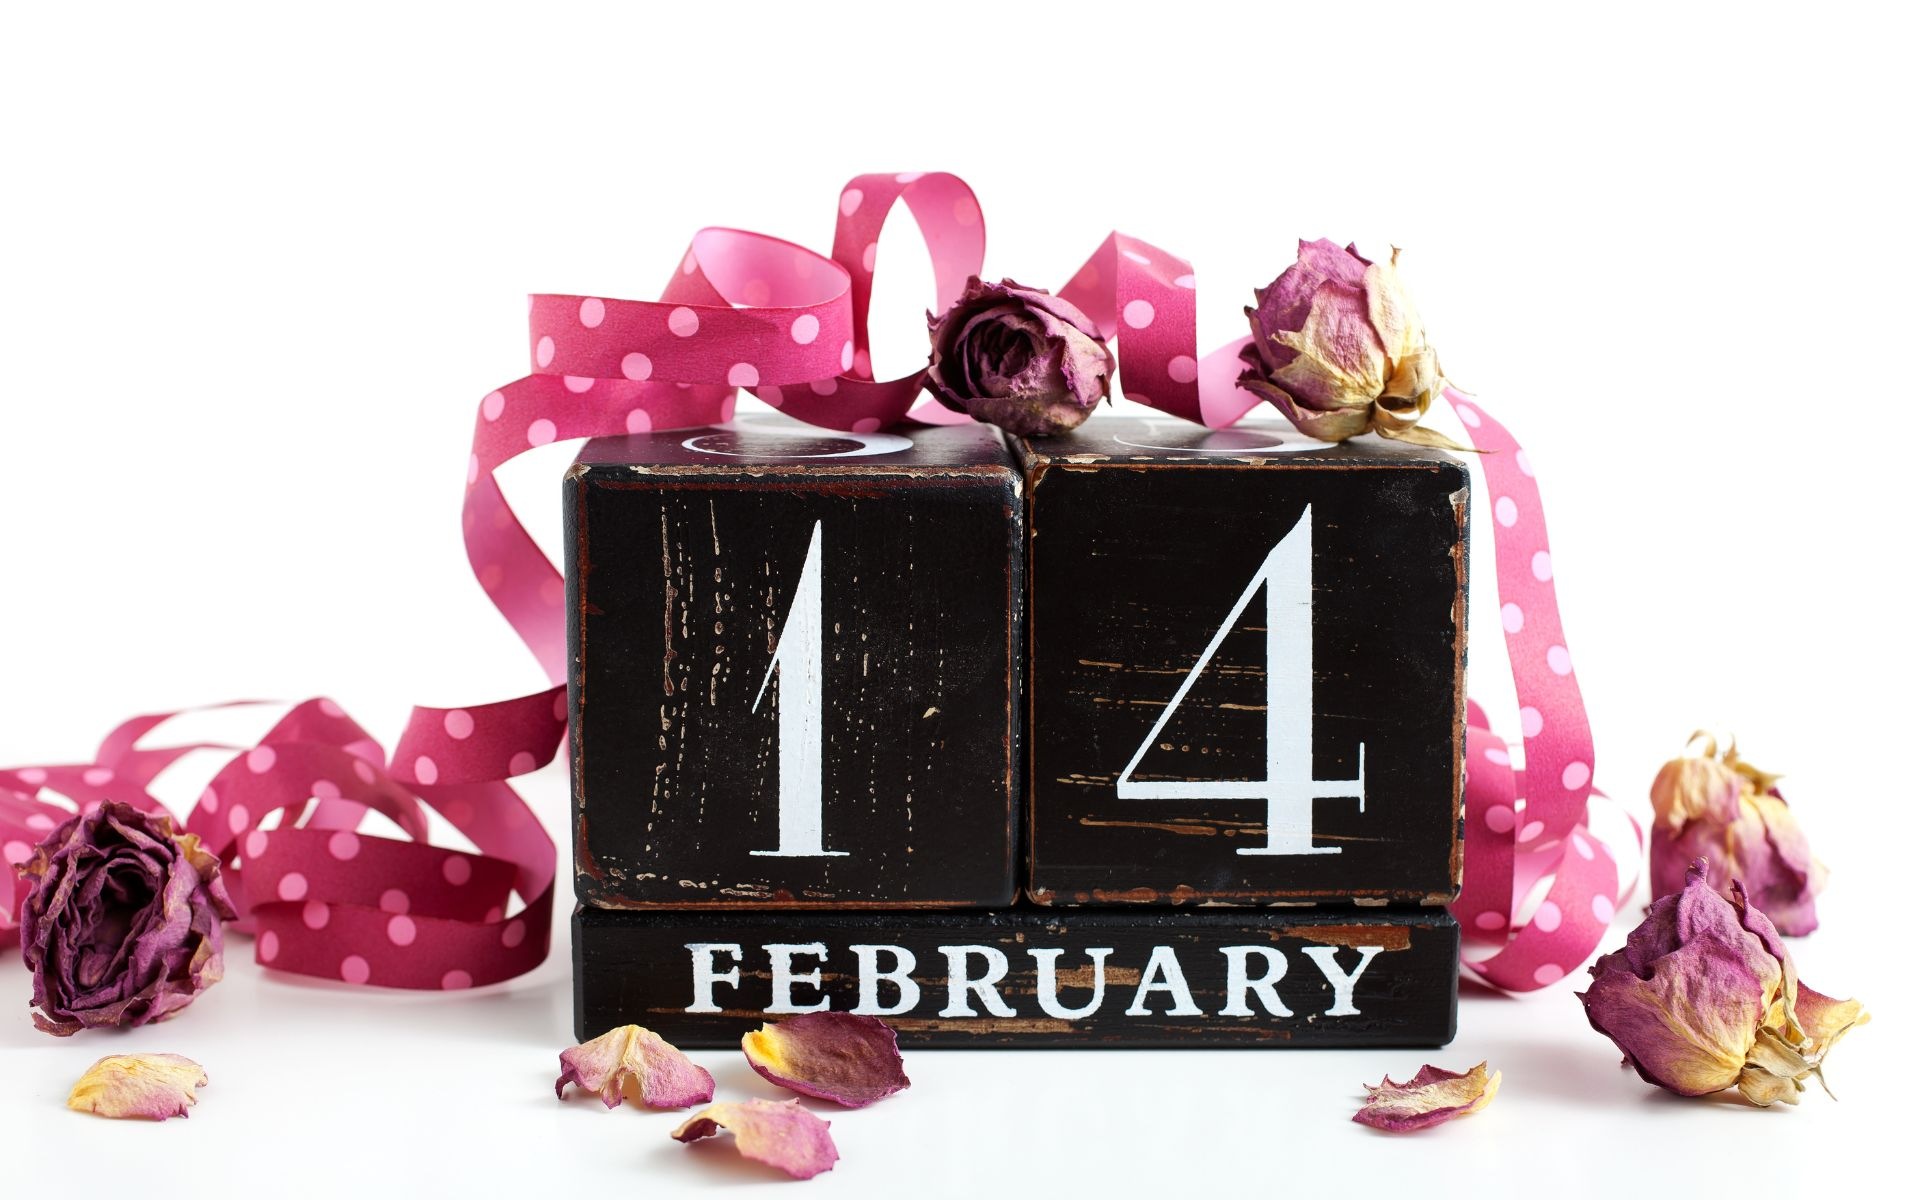 10 Most Important Things You Should Remember on Valentine’s Day